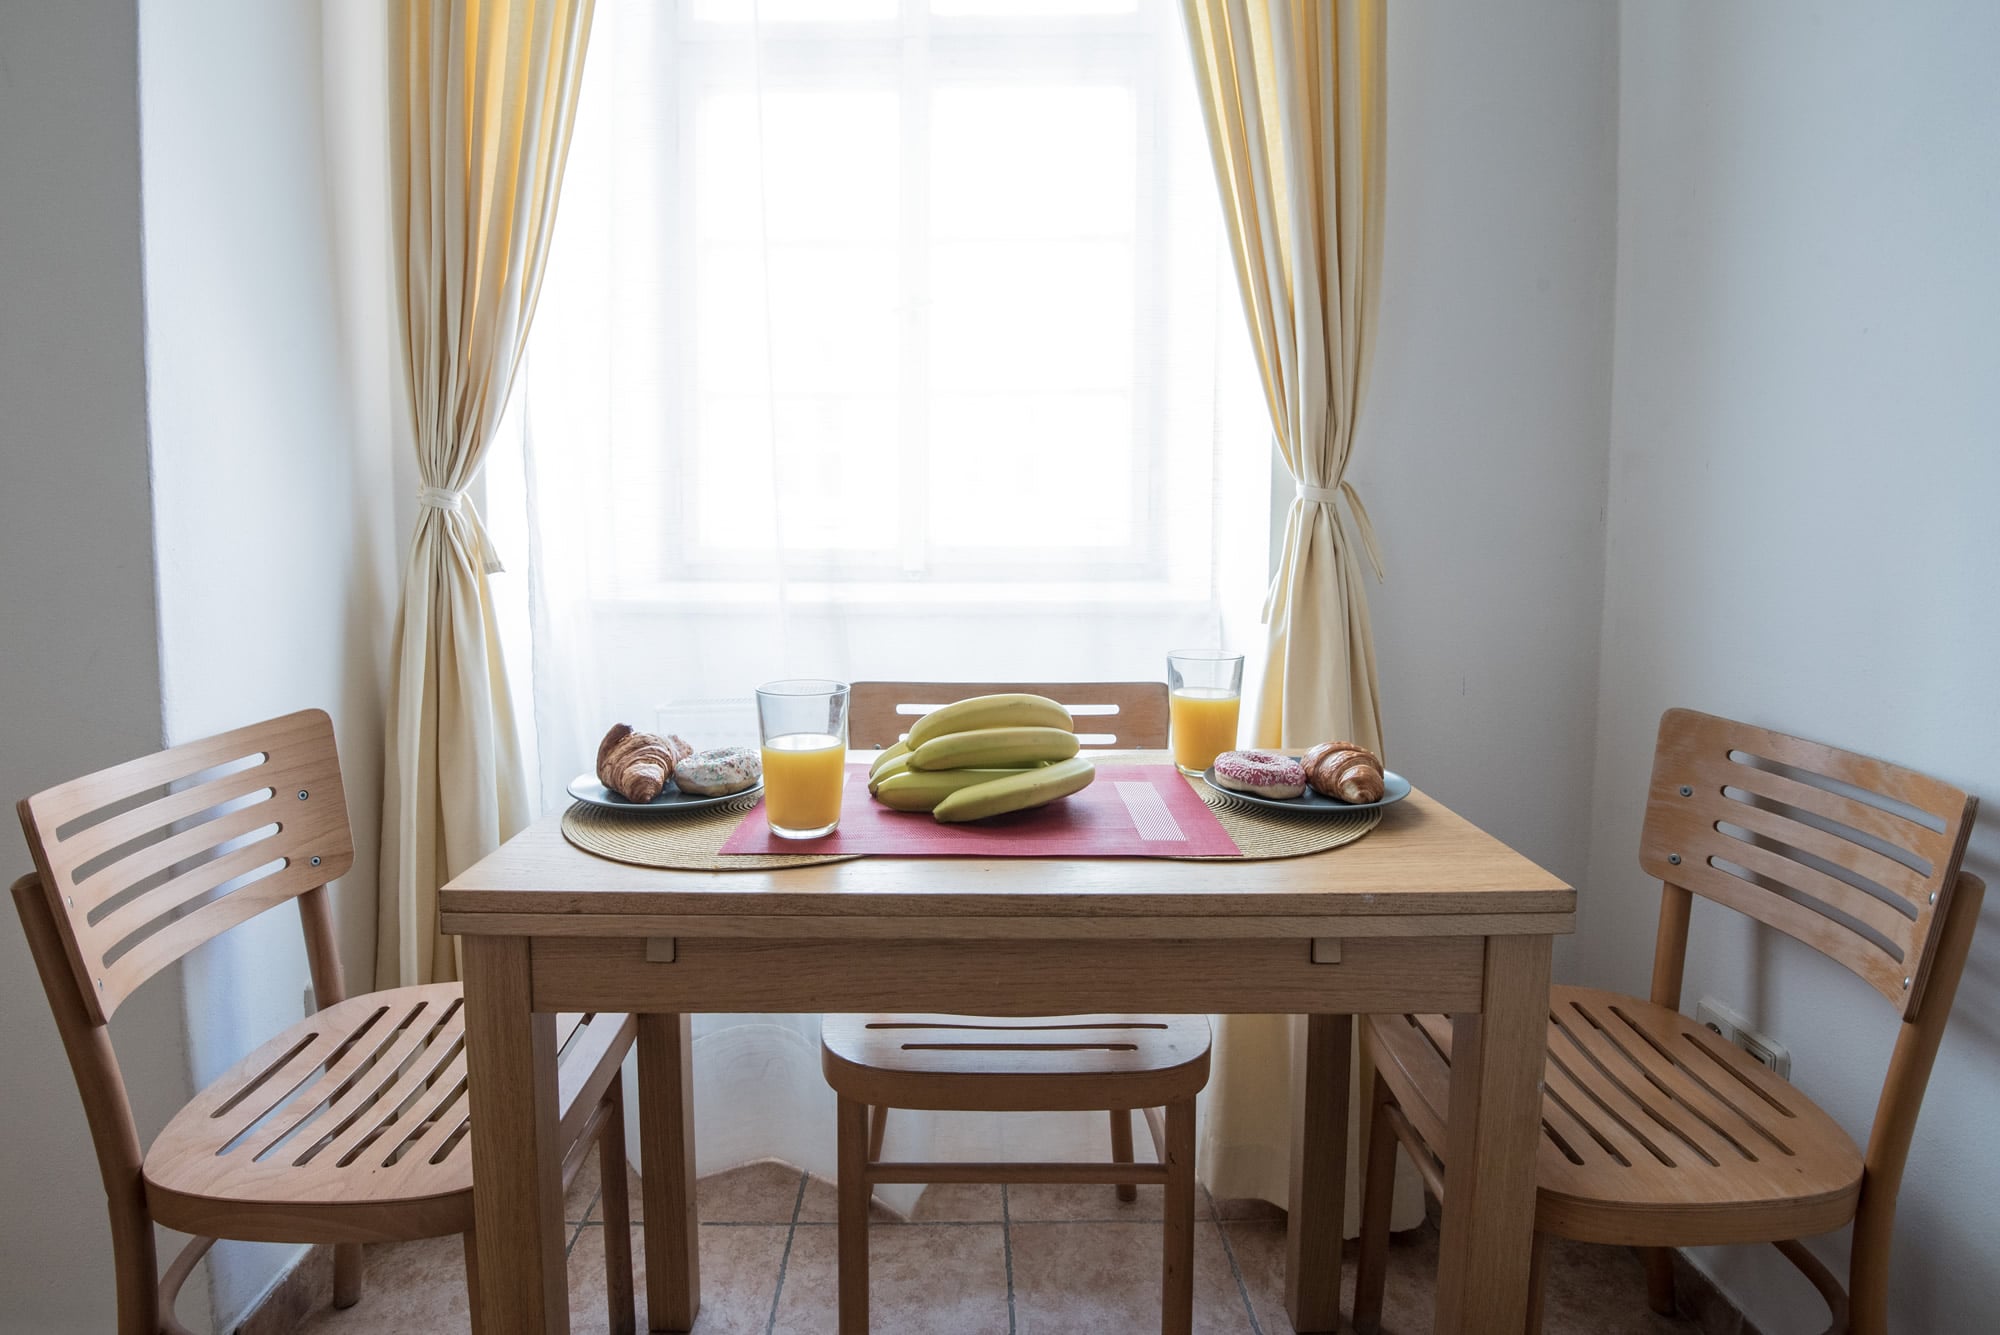 Dining table with breakfast in front of the window